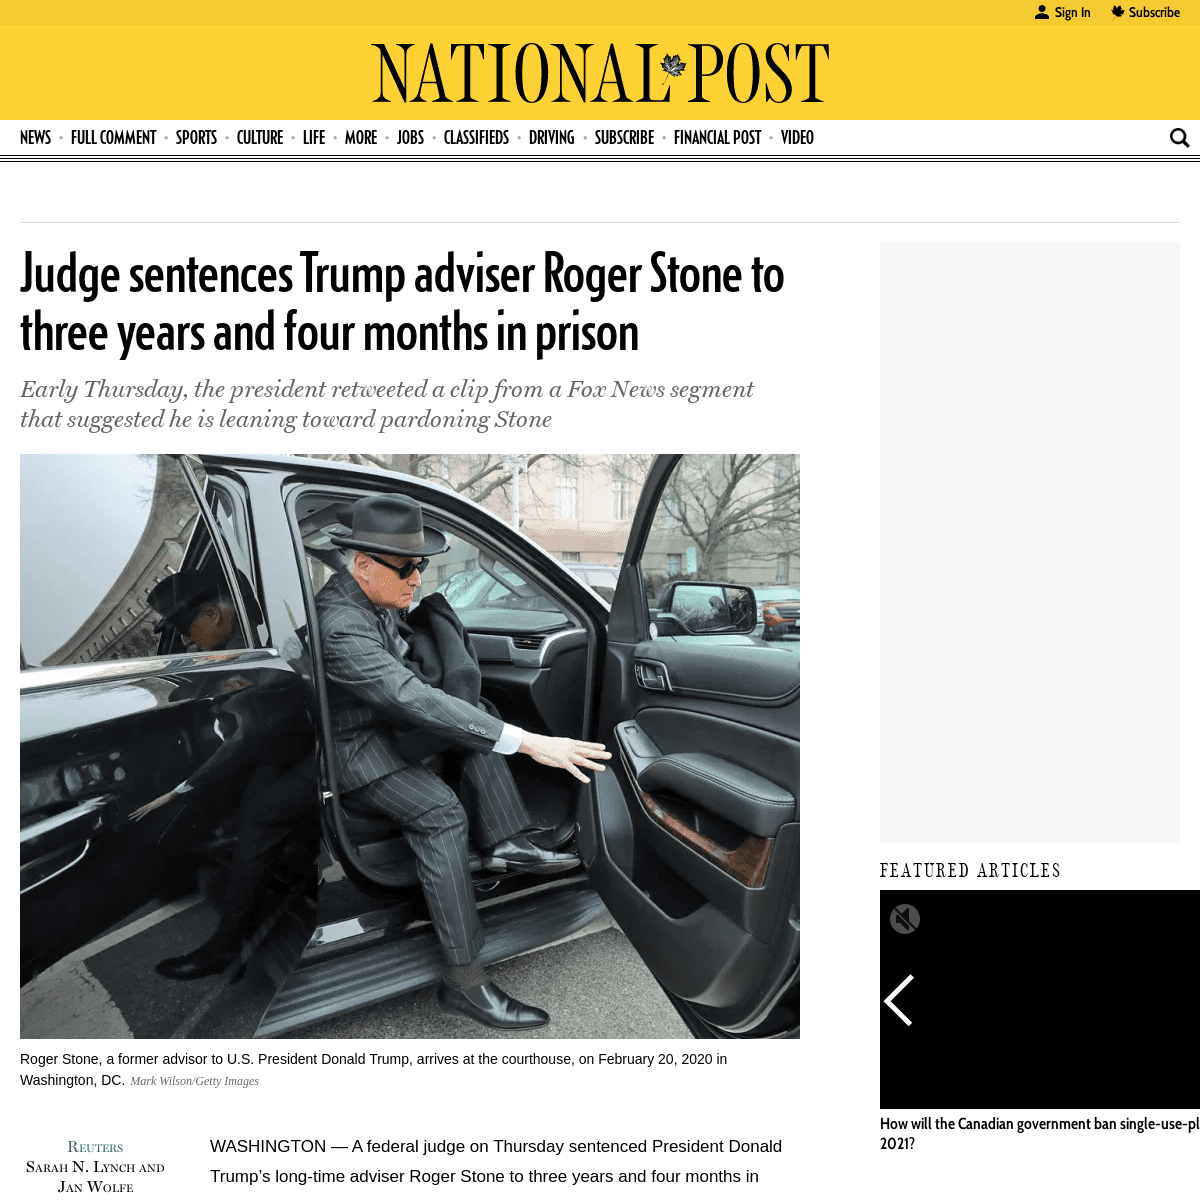 A complete backup of nationalpost.com/news/world/trump-adviser-stone-to-be-sentenced-in-case-that-has-roiled-washington